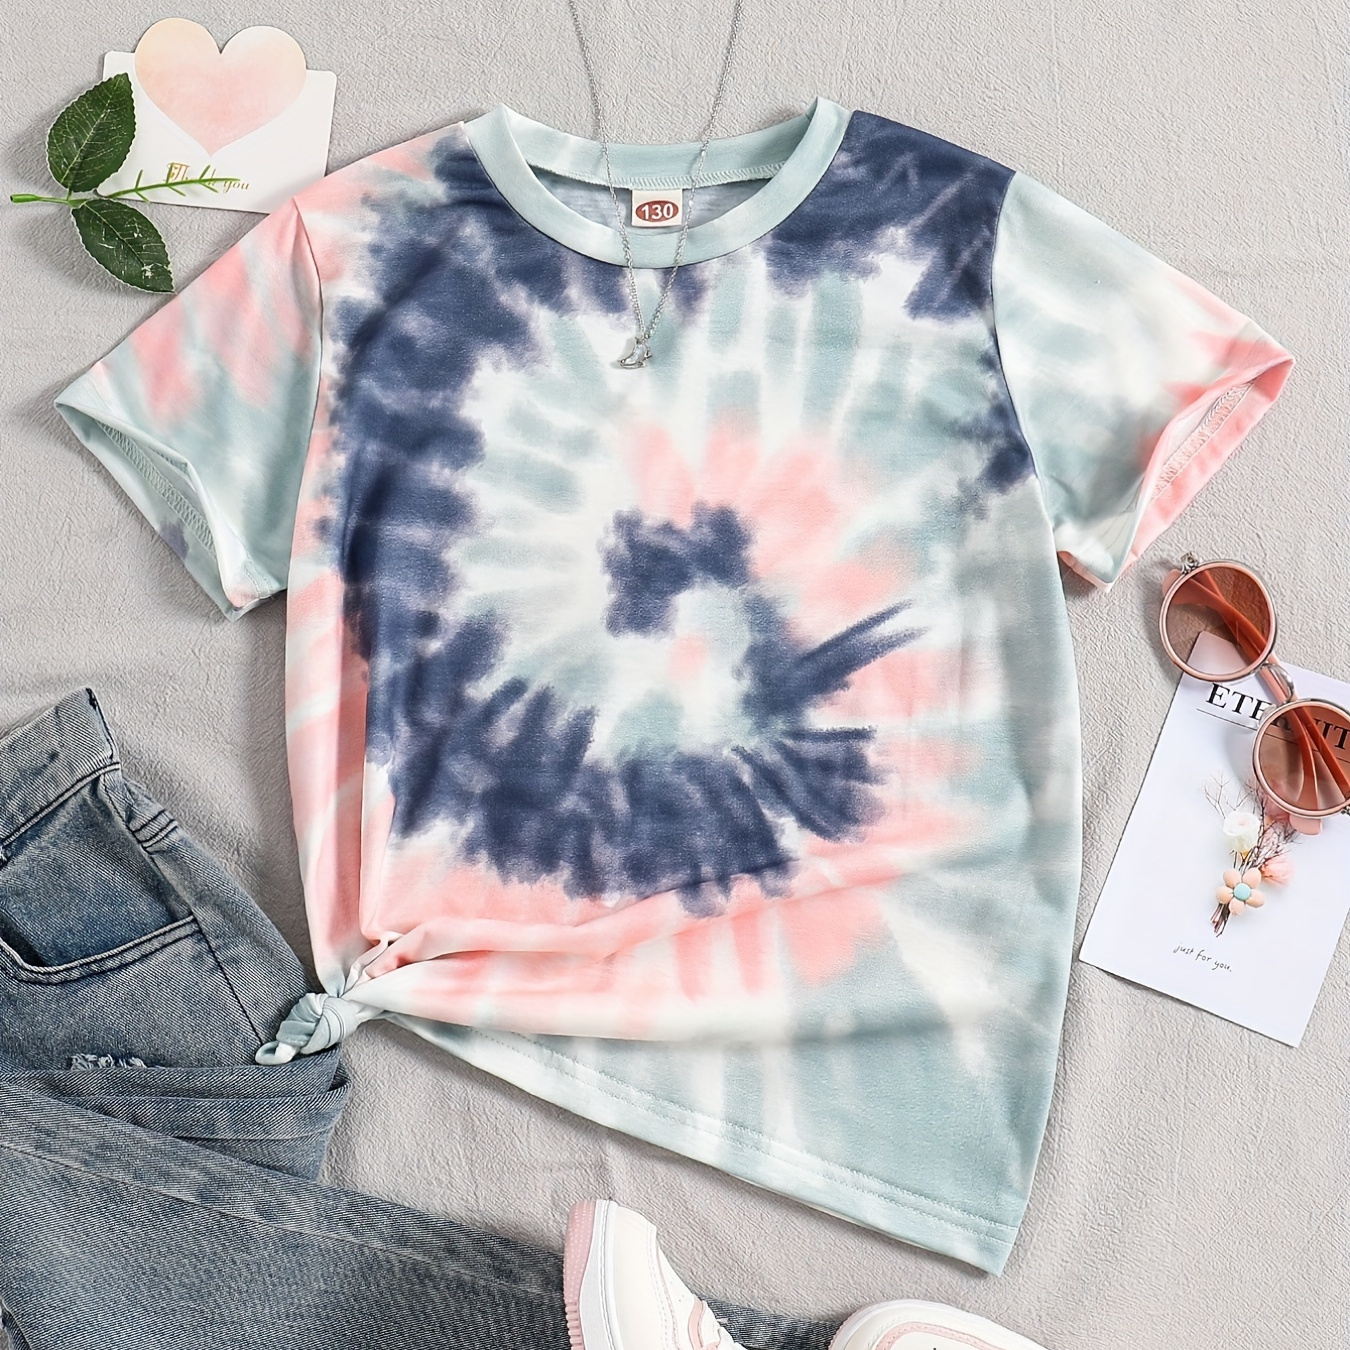 

Girls Casual Tie Dye Graphic T-shirt, Lightweight And Comfortable Fit Kids Crew Neck Summer Tops Clothing